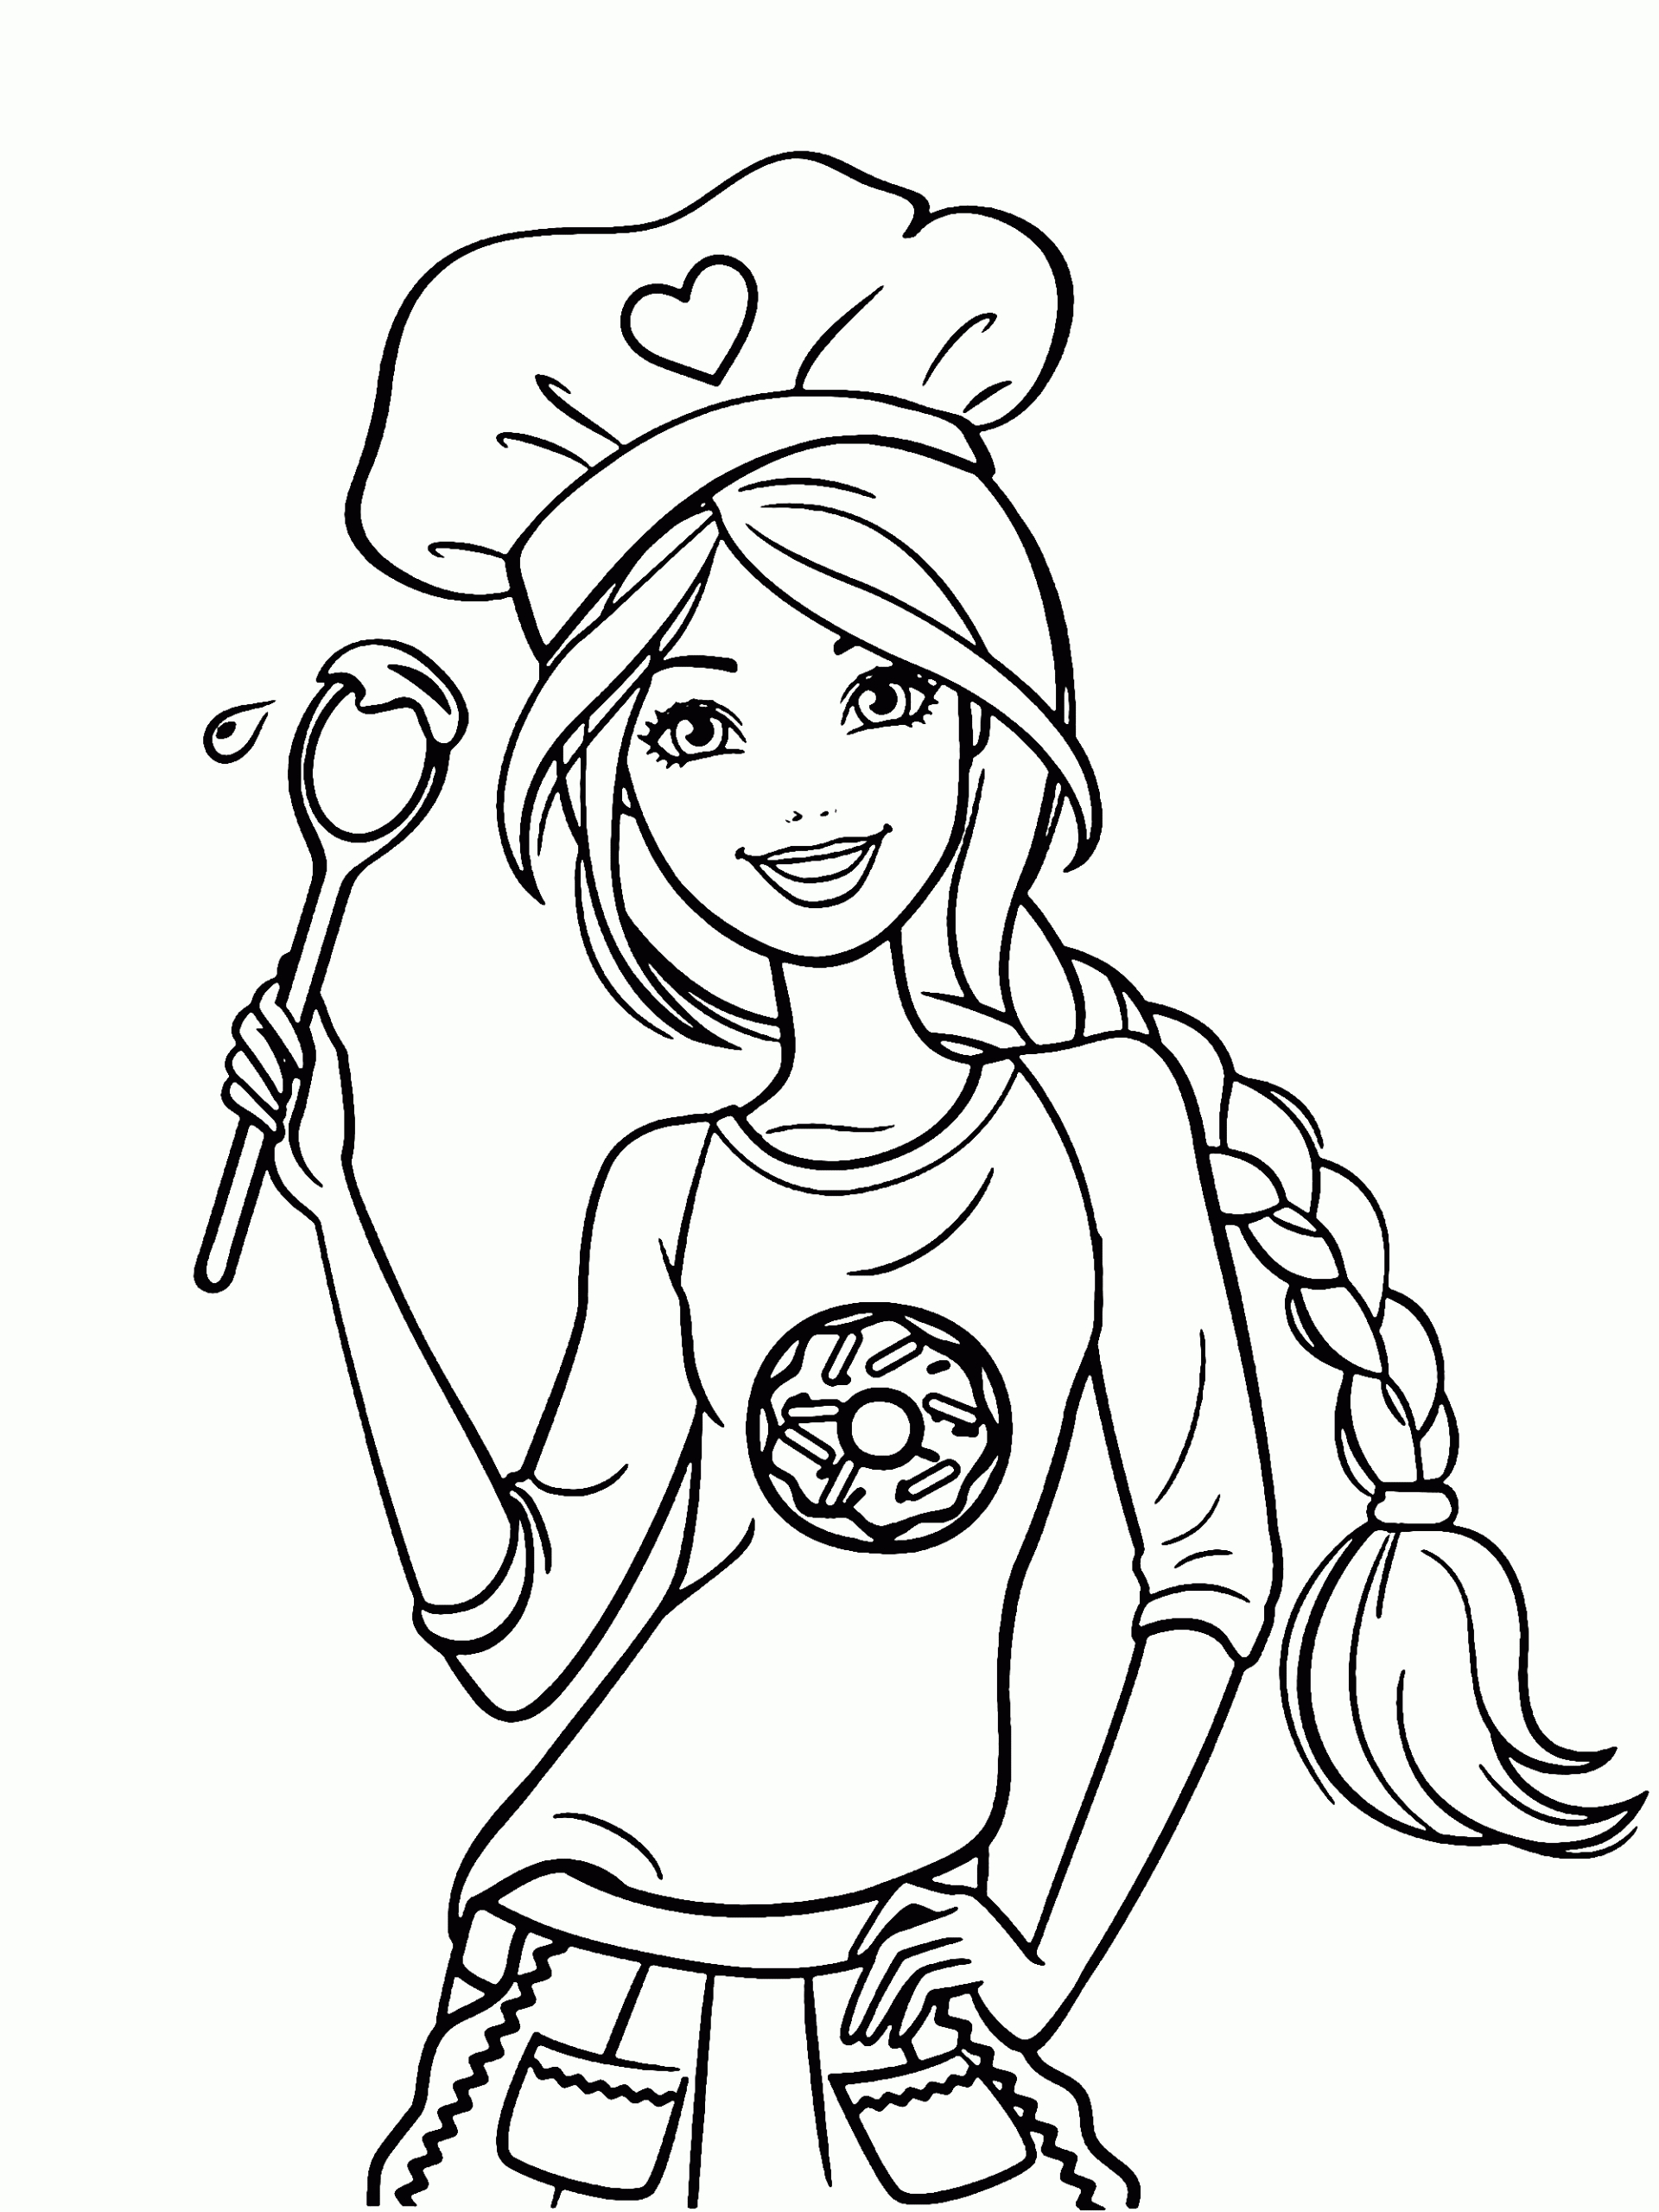 Barbie Coloring Pages For Girls: Toddlers &amp;amp; Adults » Print Color Craft tout Coloriage Barbie 